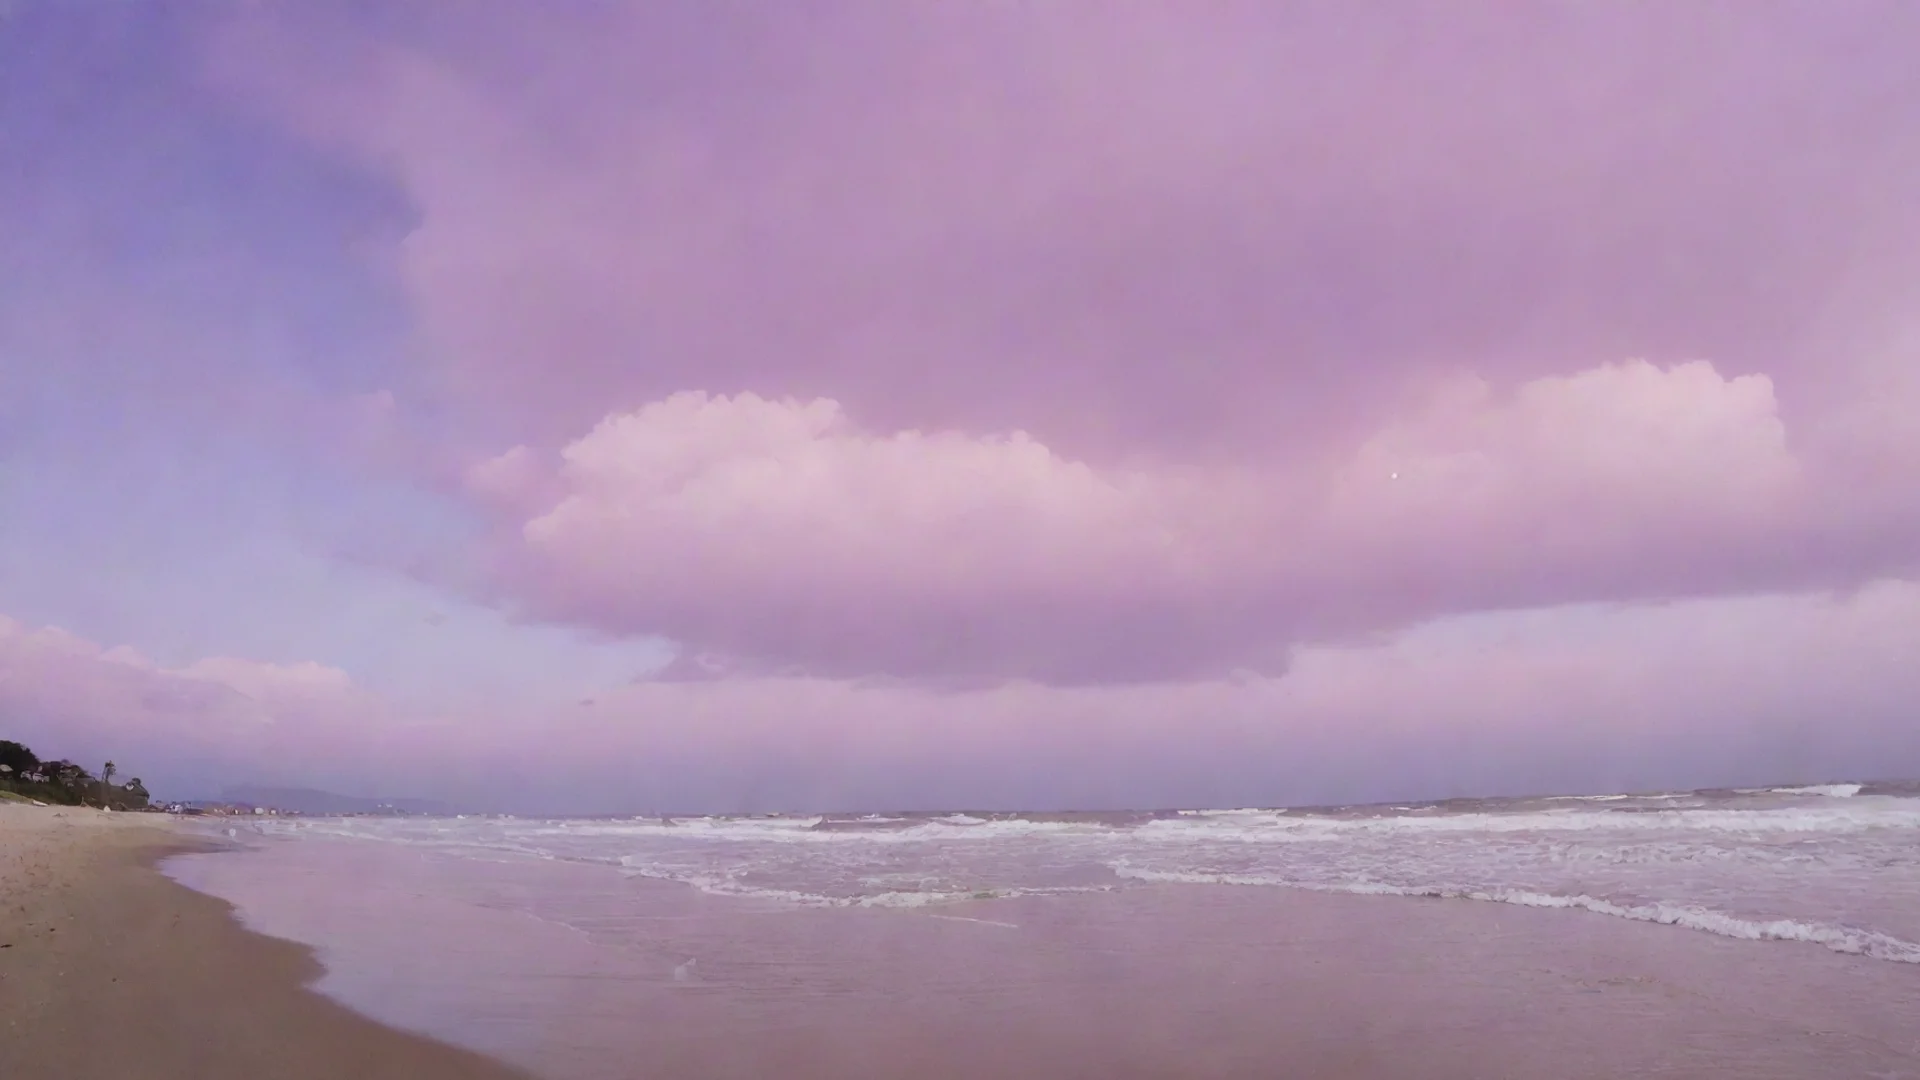 aiartstation art purple pink sky at a beach confident engaging wow 3 wide